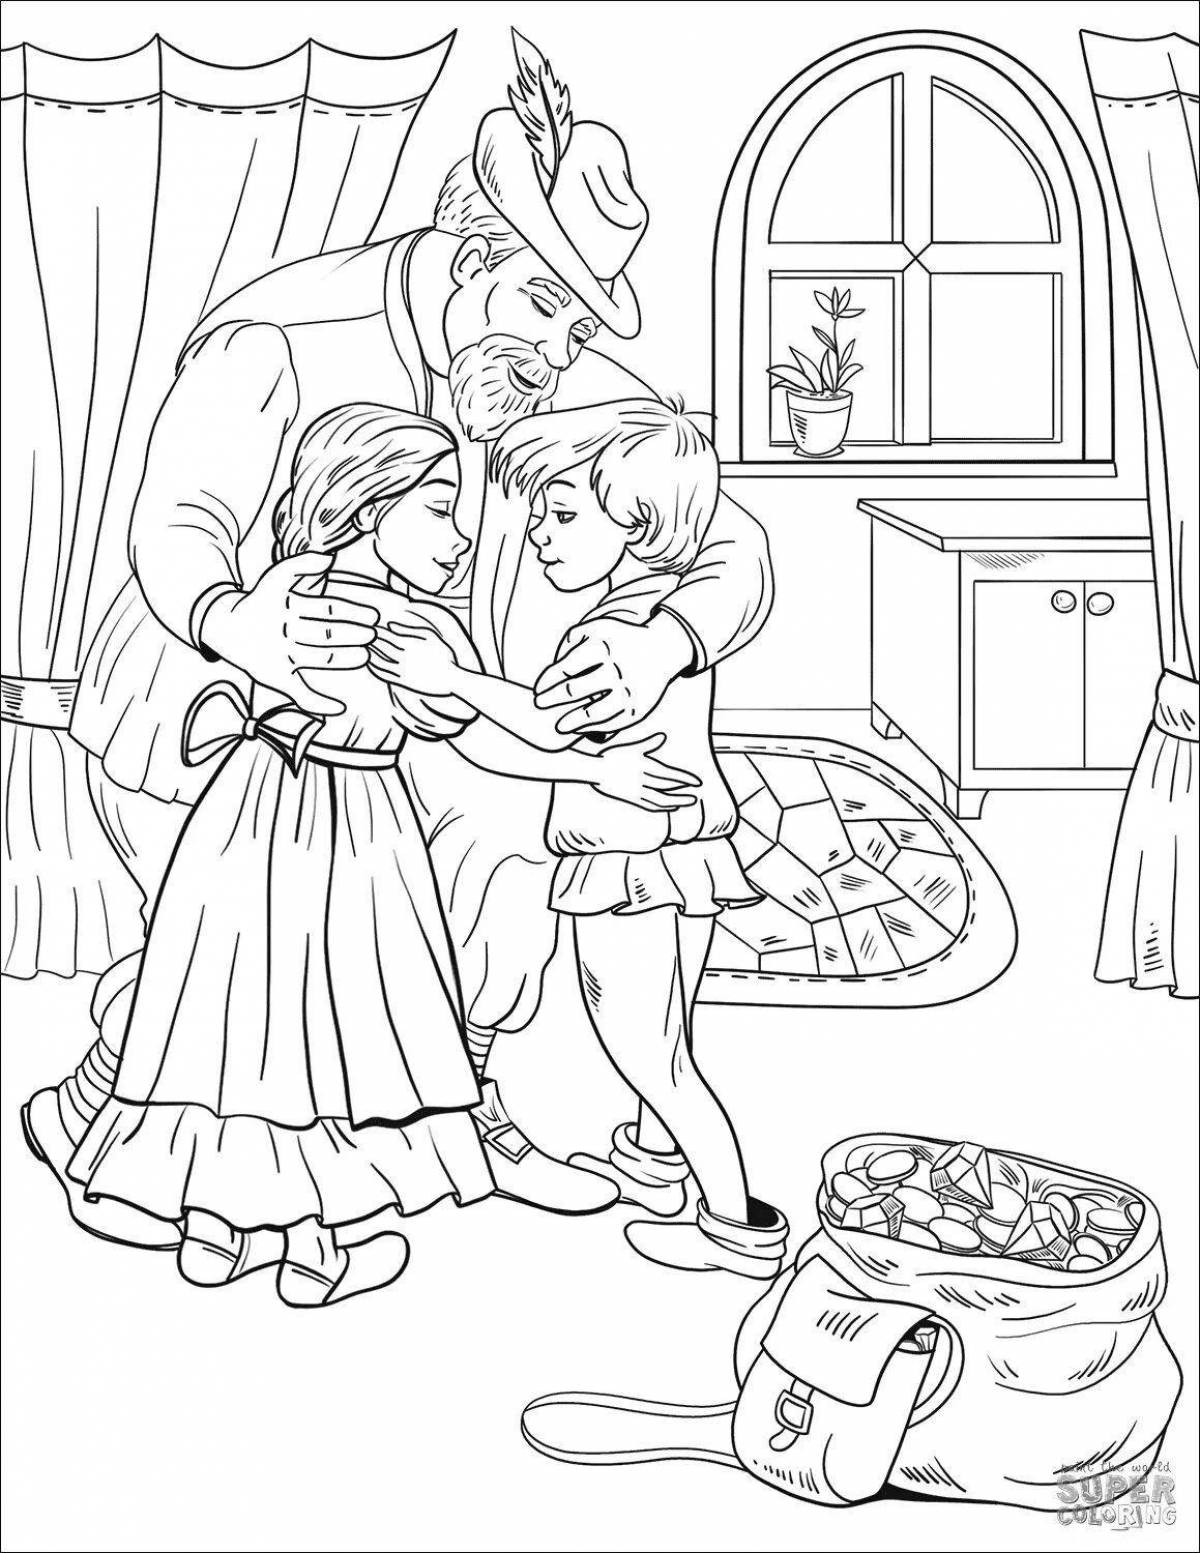 Dazzling hansel and gretel coloring book